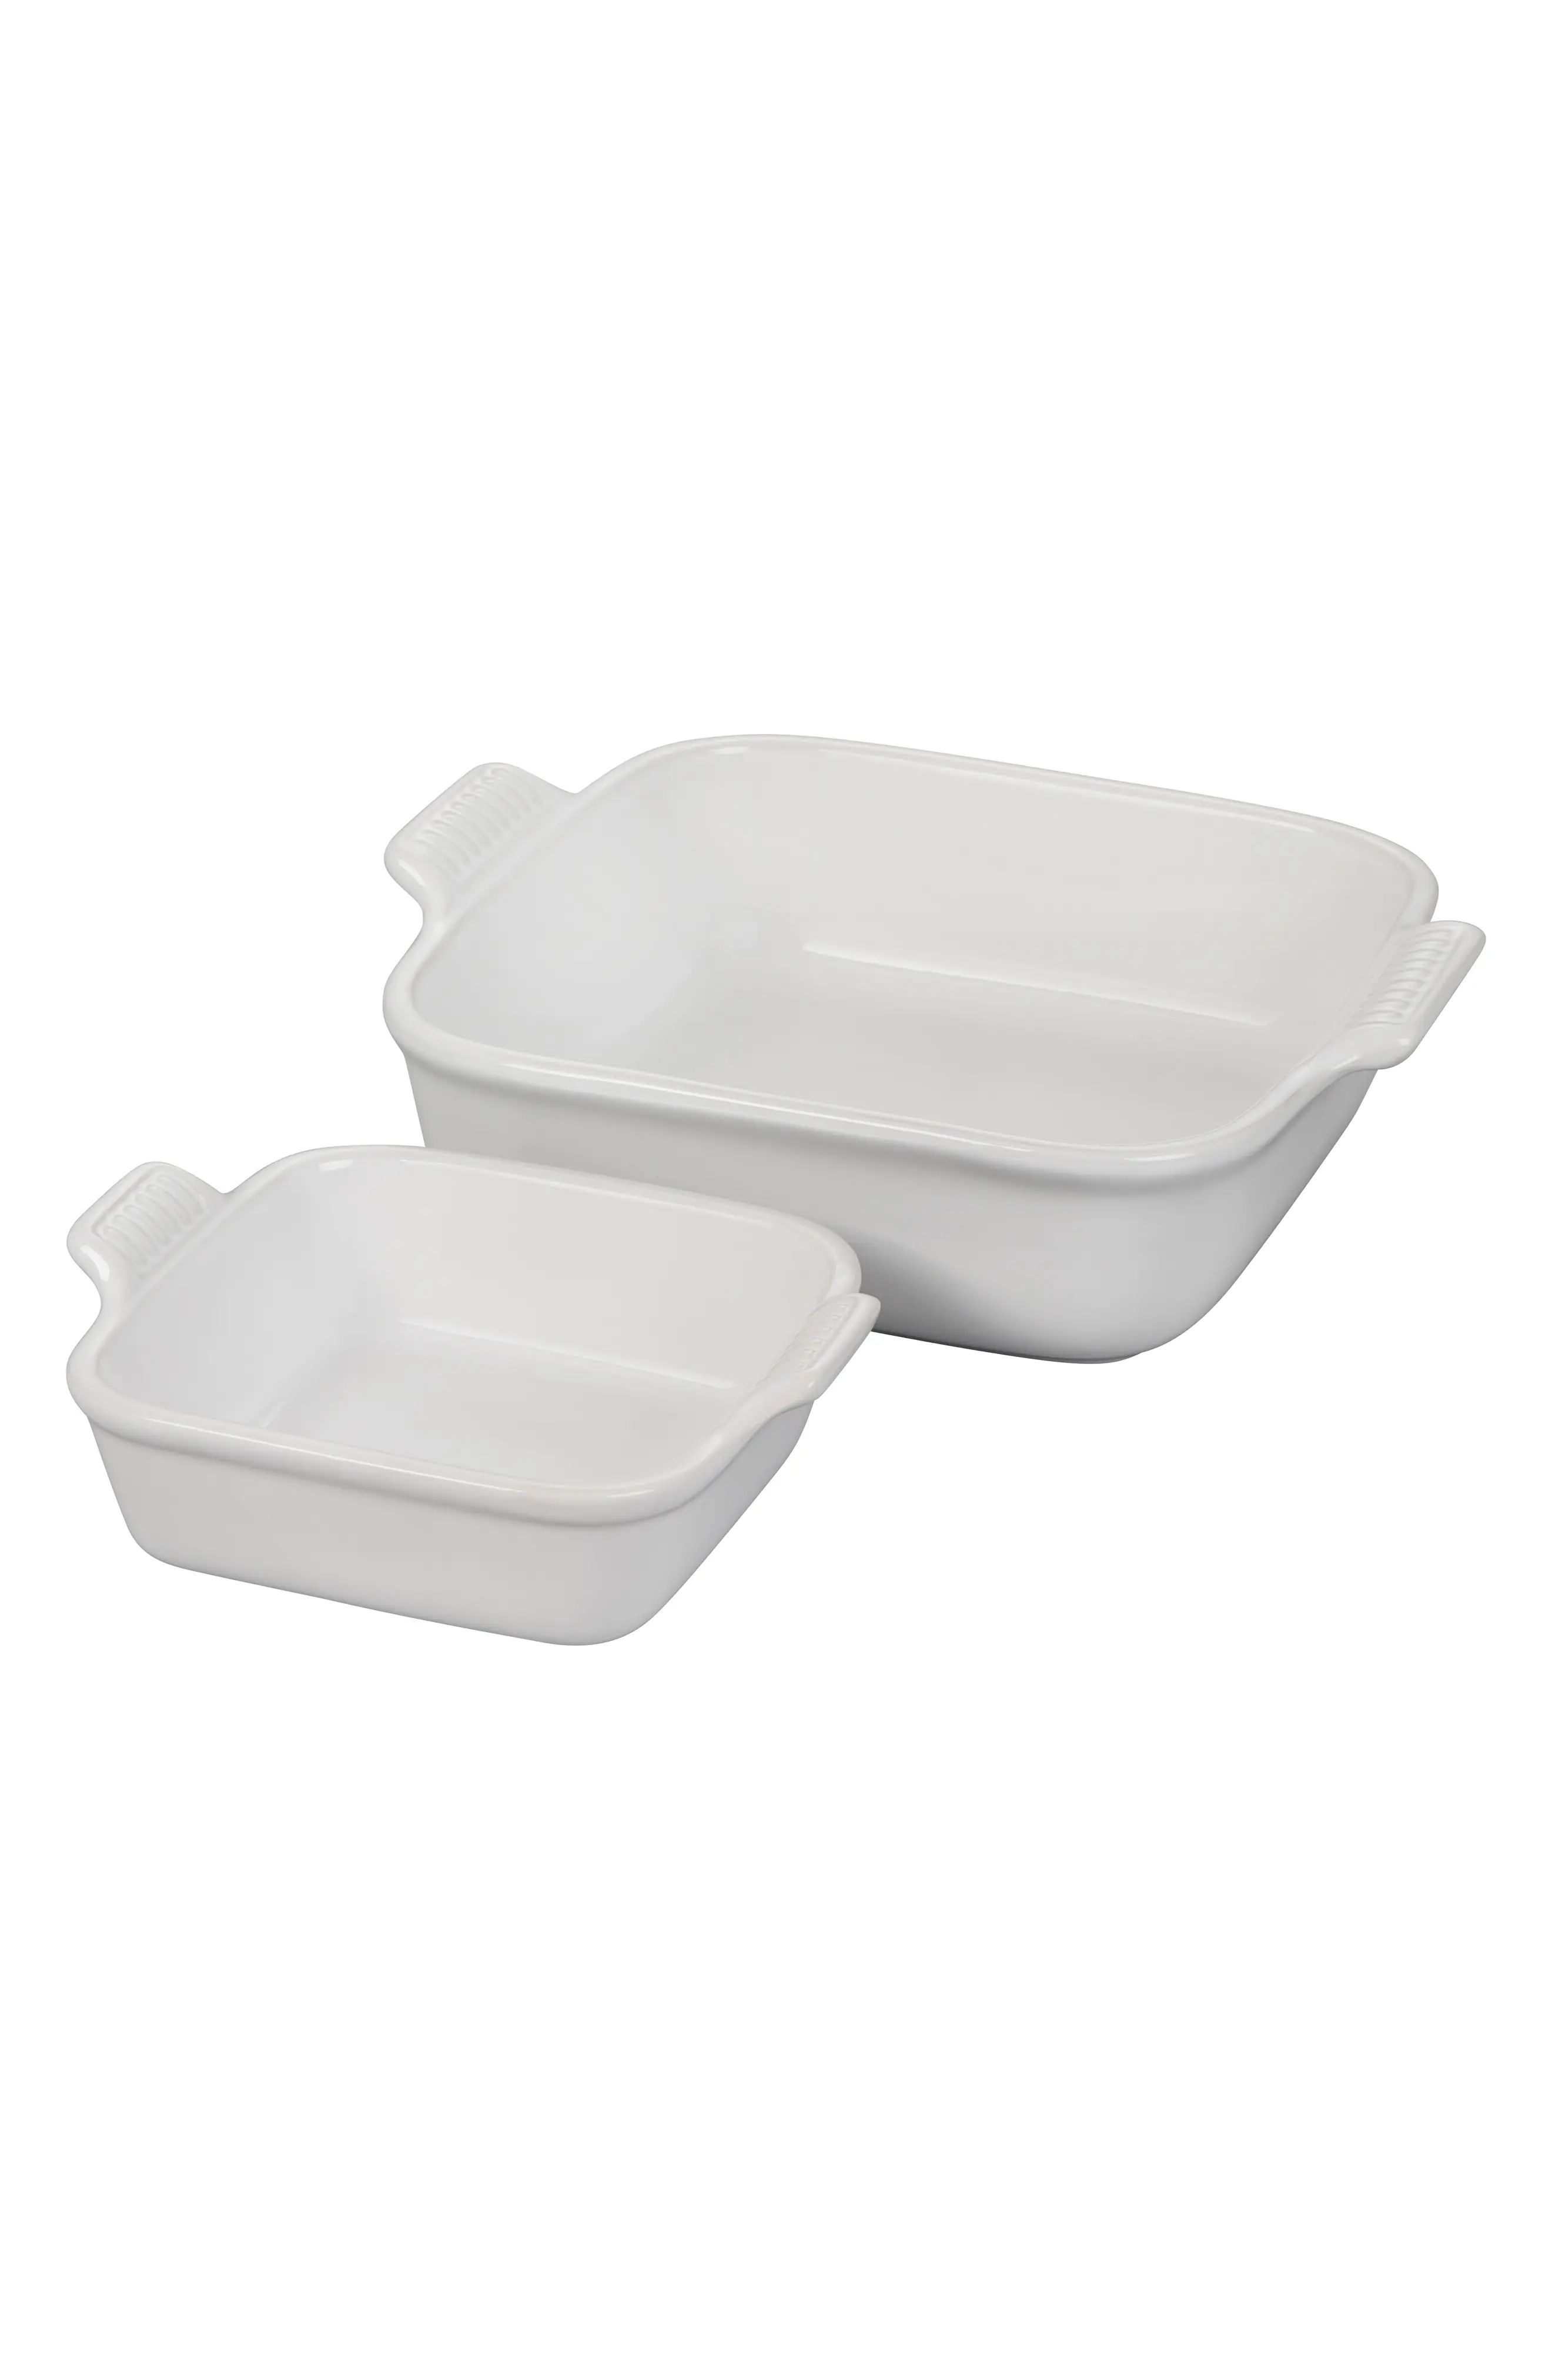 Le Creuset Heritage Square Set of 2 Baking Dishes in White at Nordstrom | Nordstrom